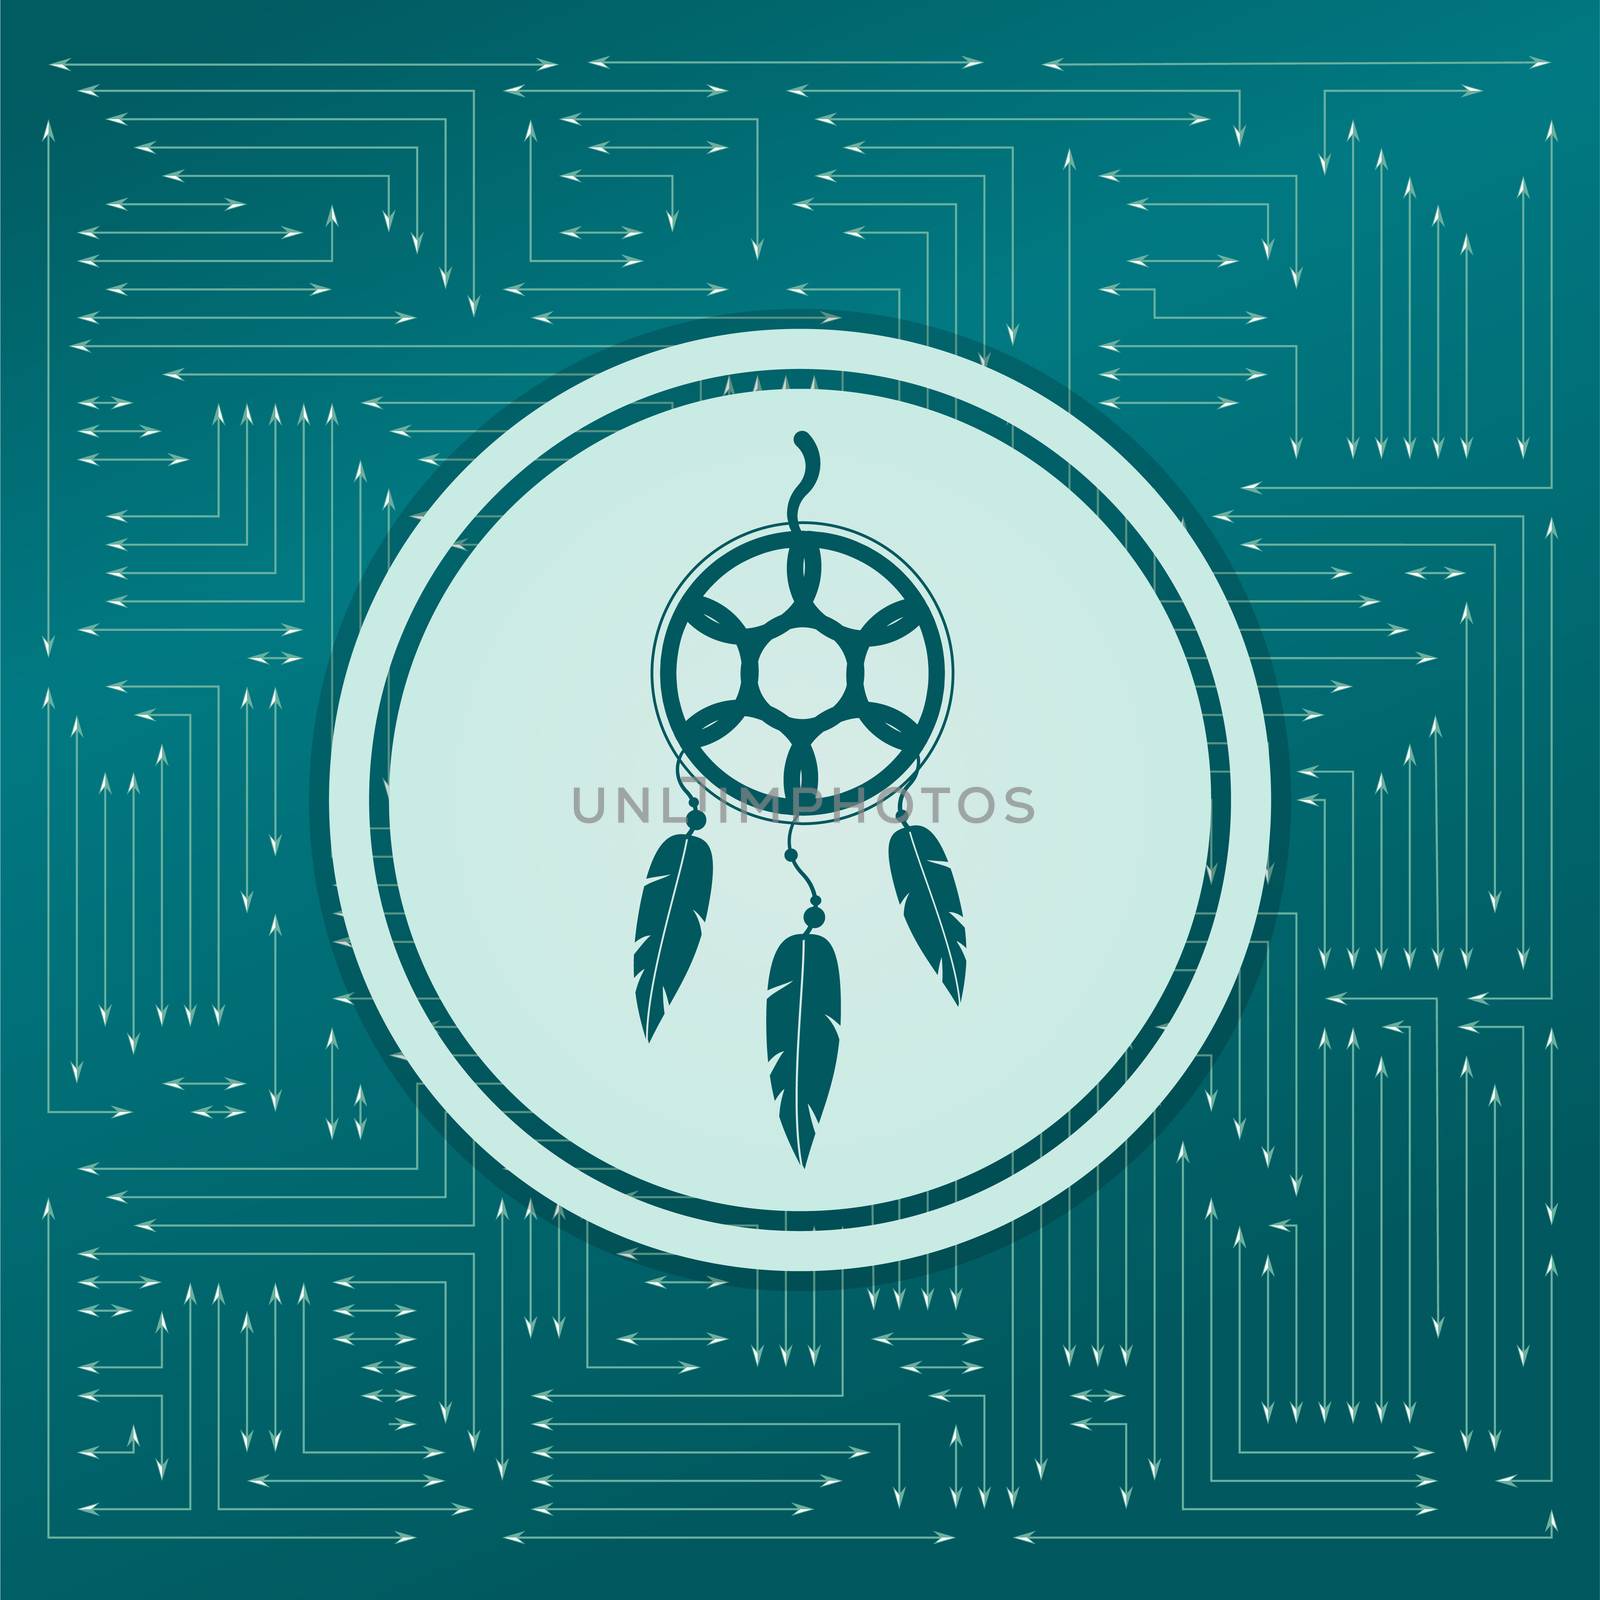 Dreamcatcher icon on a green background, with arrows in different directions. It appears on the electronic board. illustration